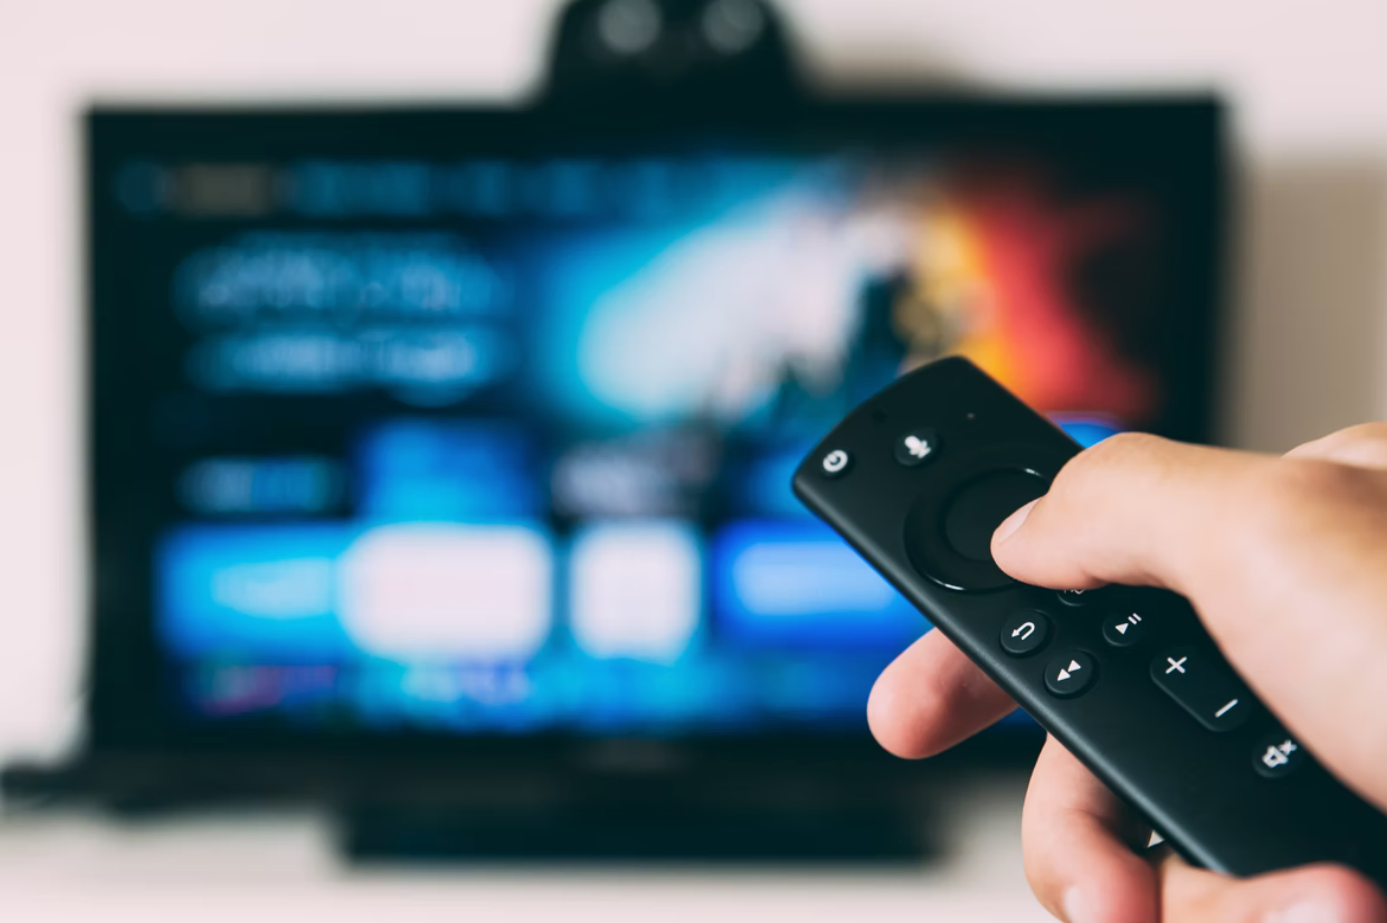 How to find Firestick IP address